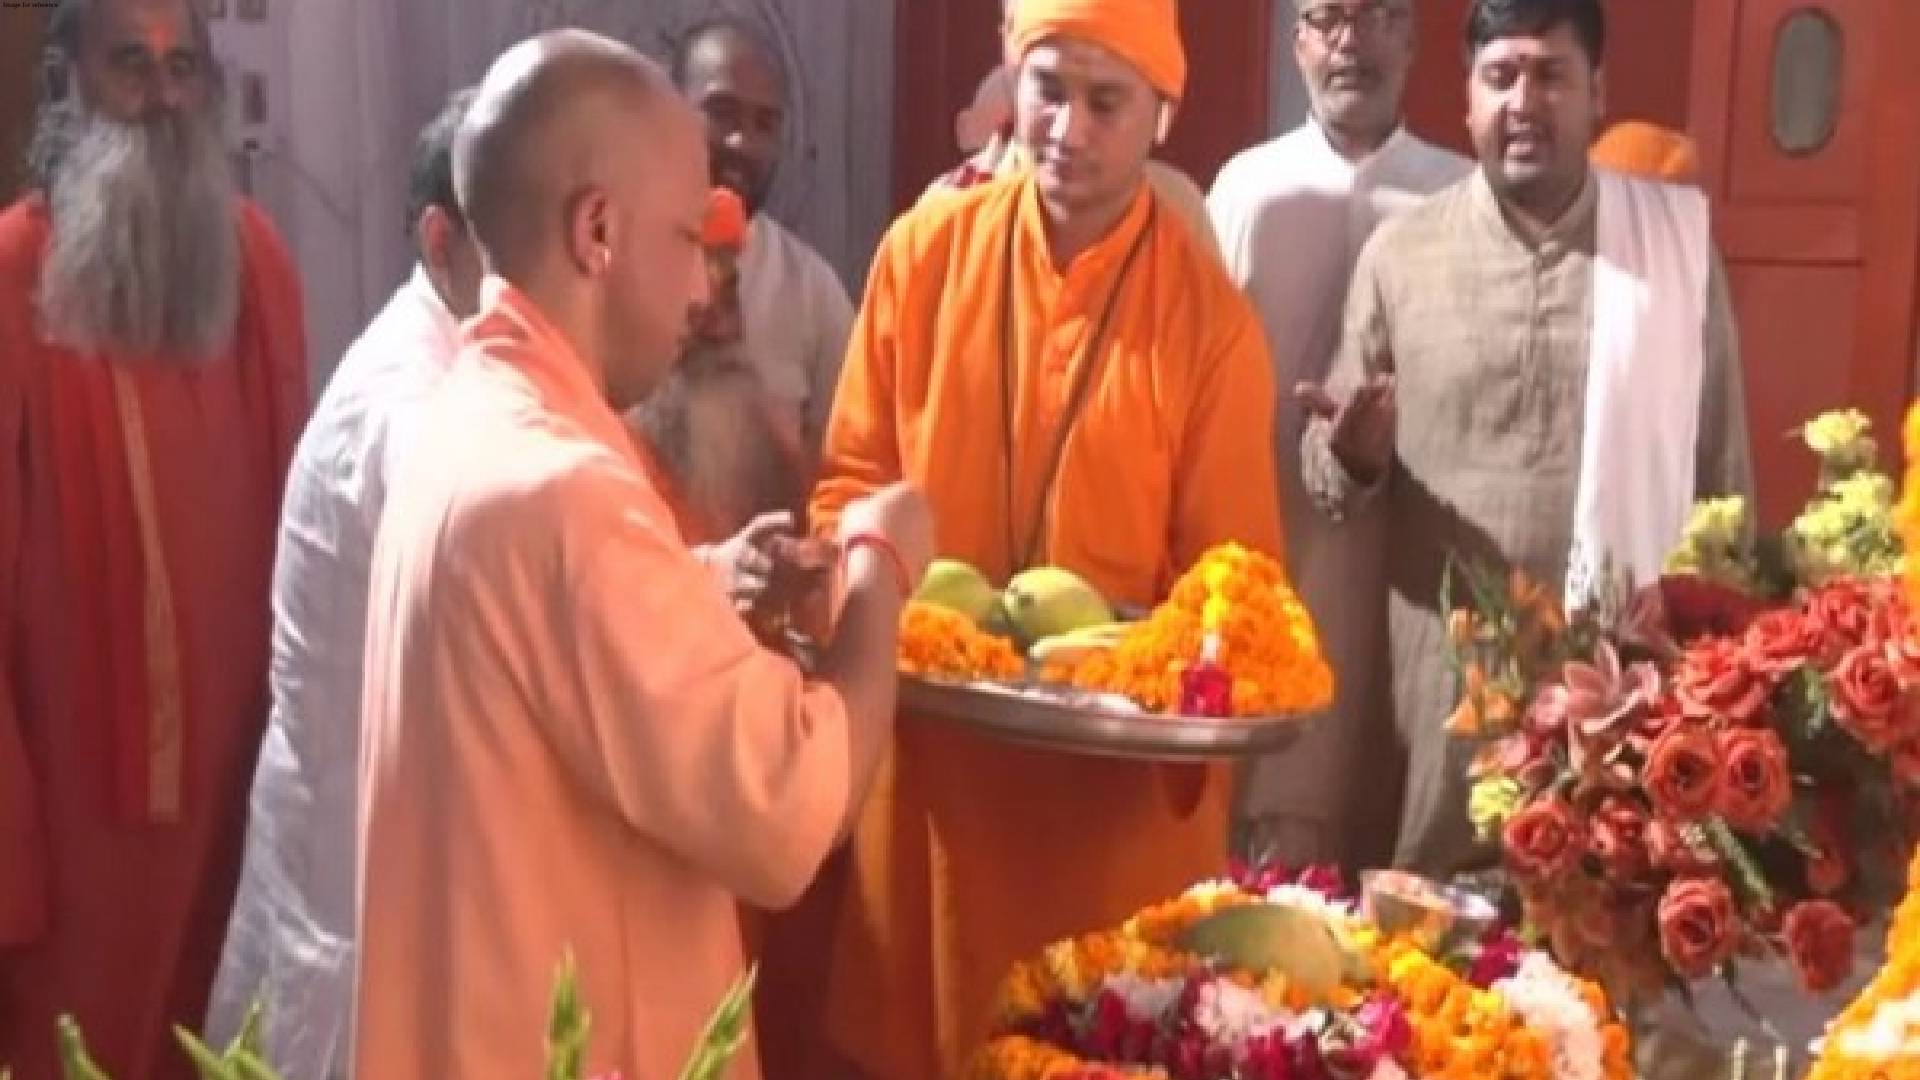 State leaders extend their wishes on the occasion of Guru Purnima